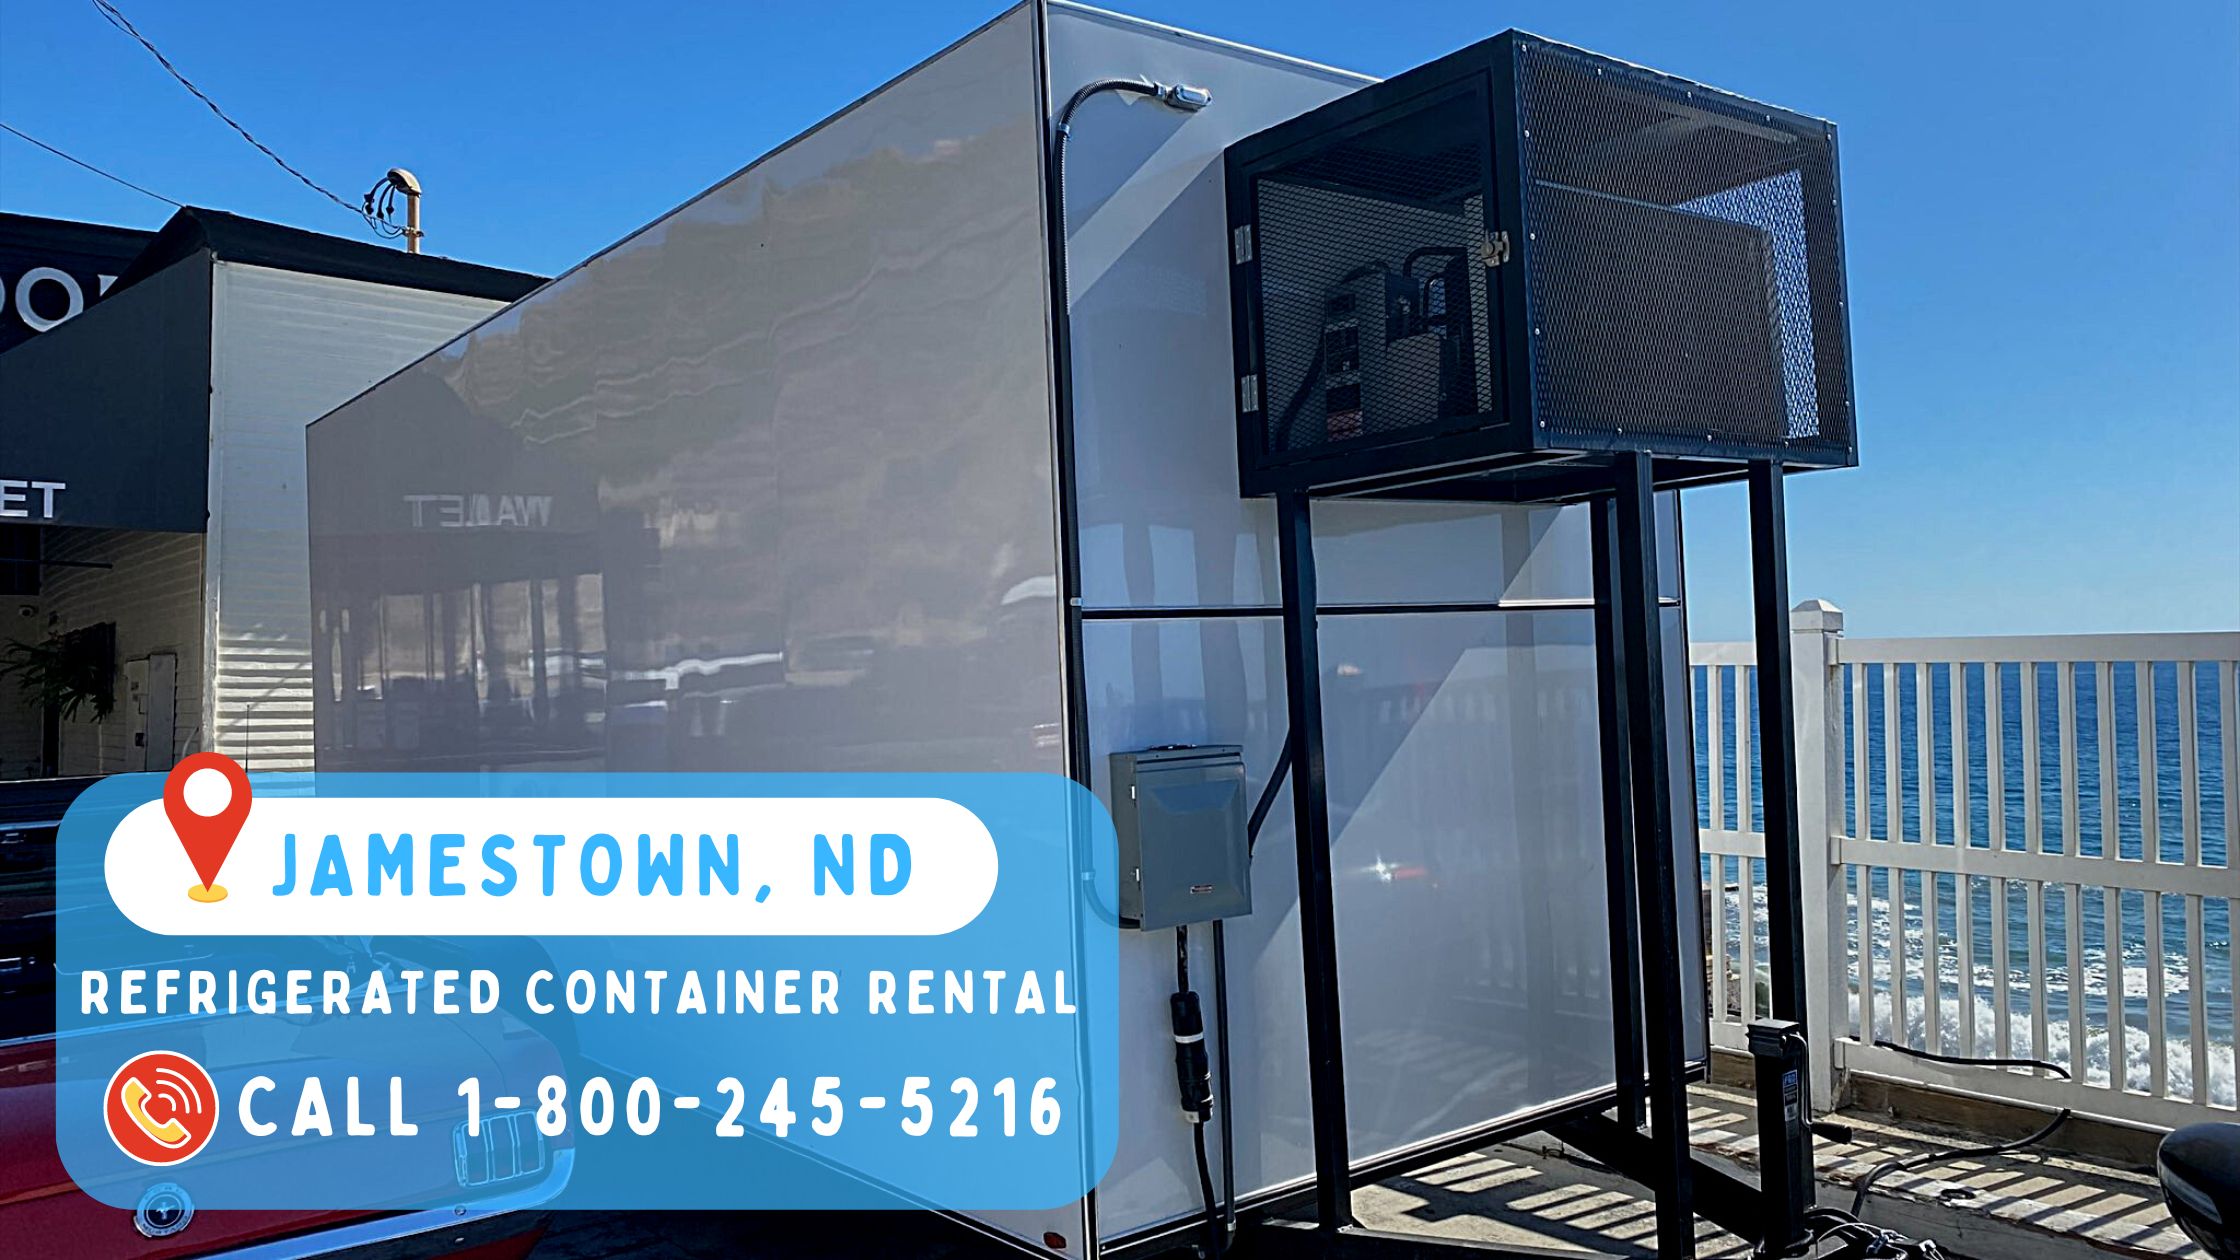 Refrigerated Container Rental in Jamestown